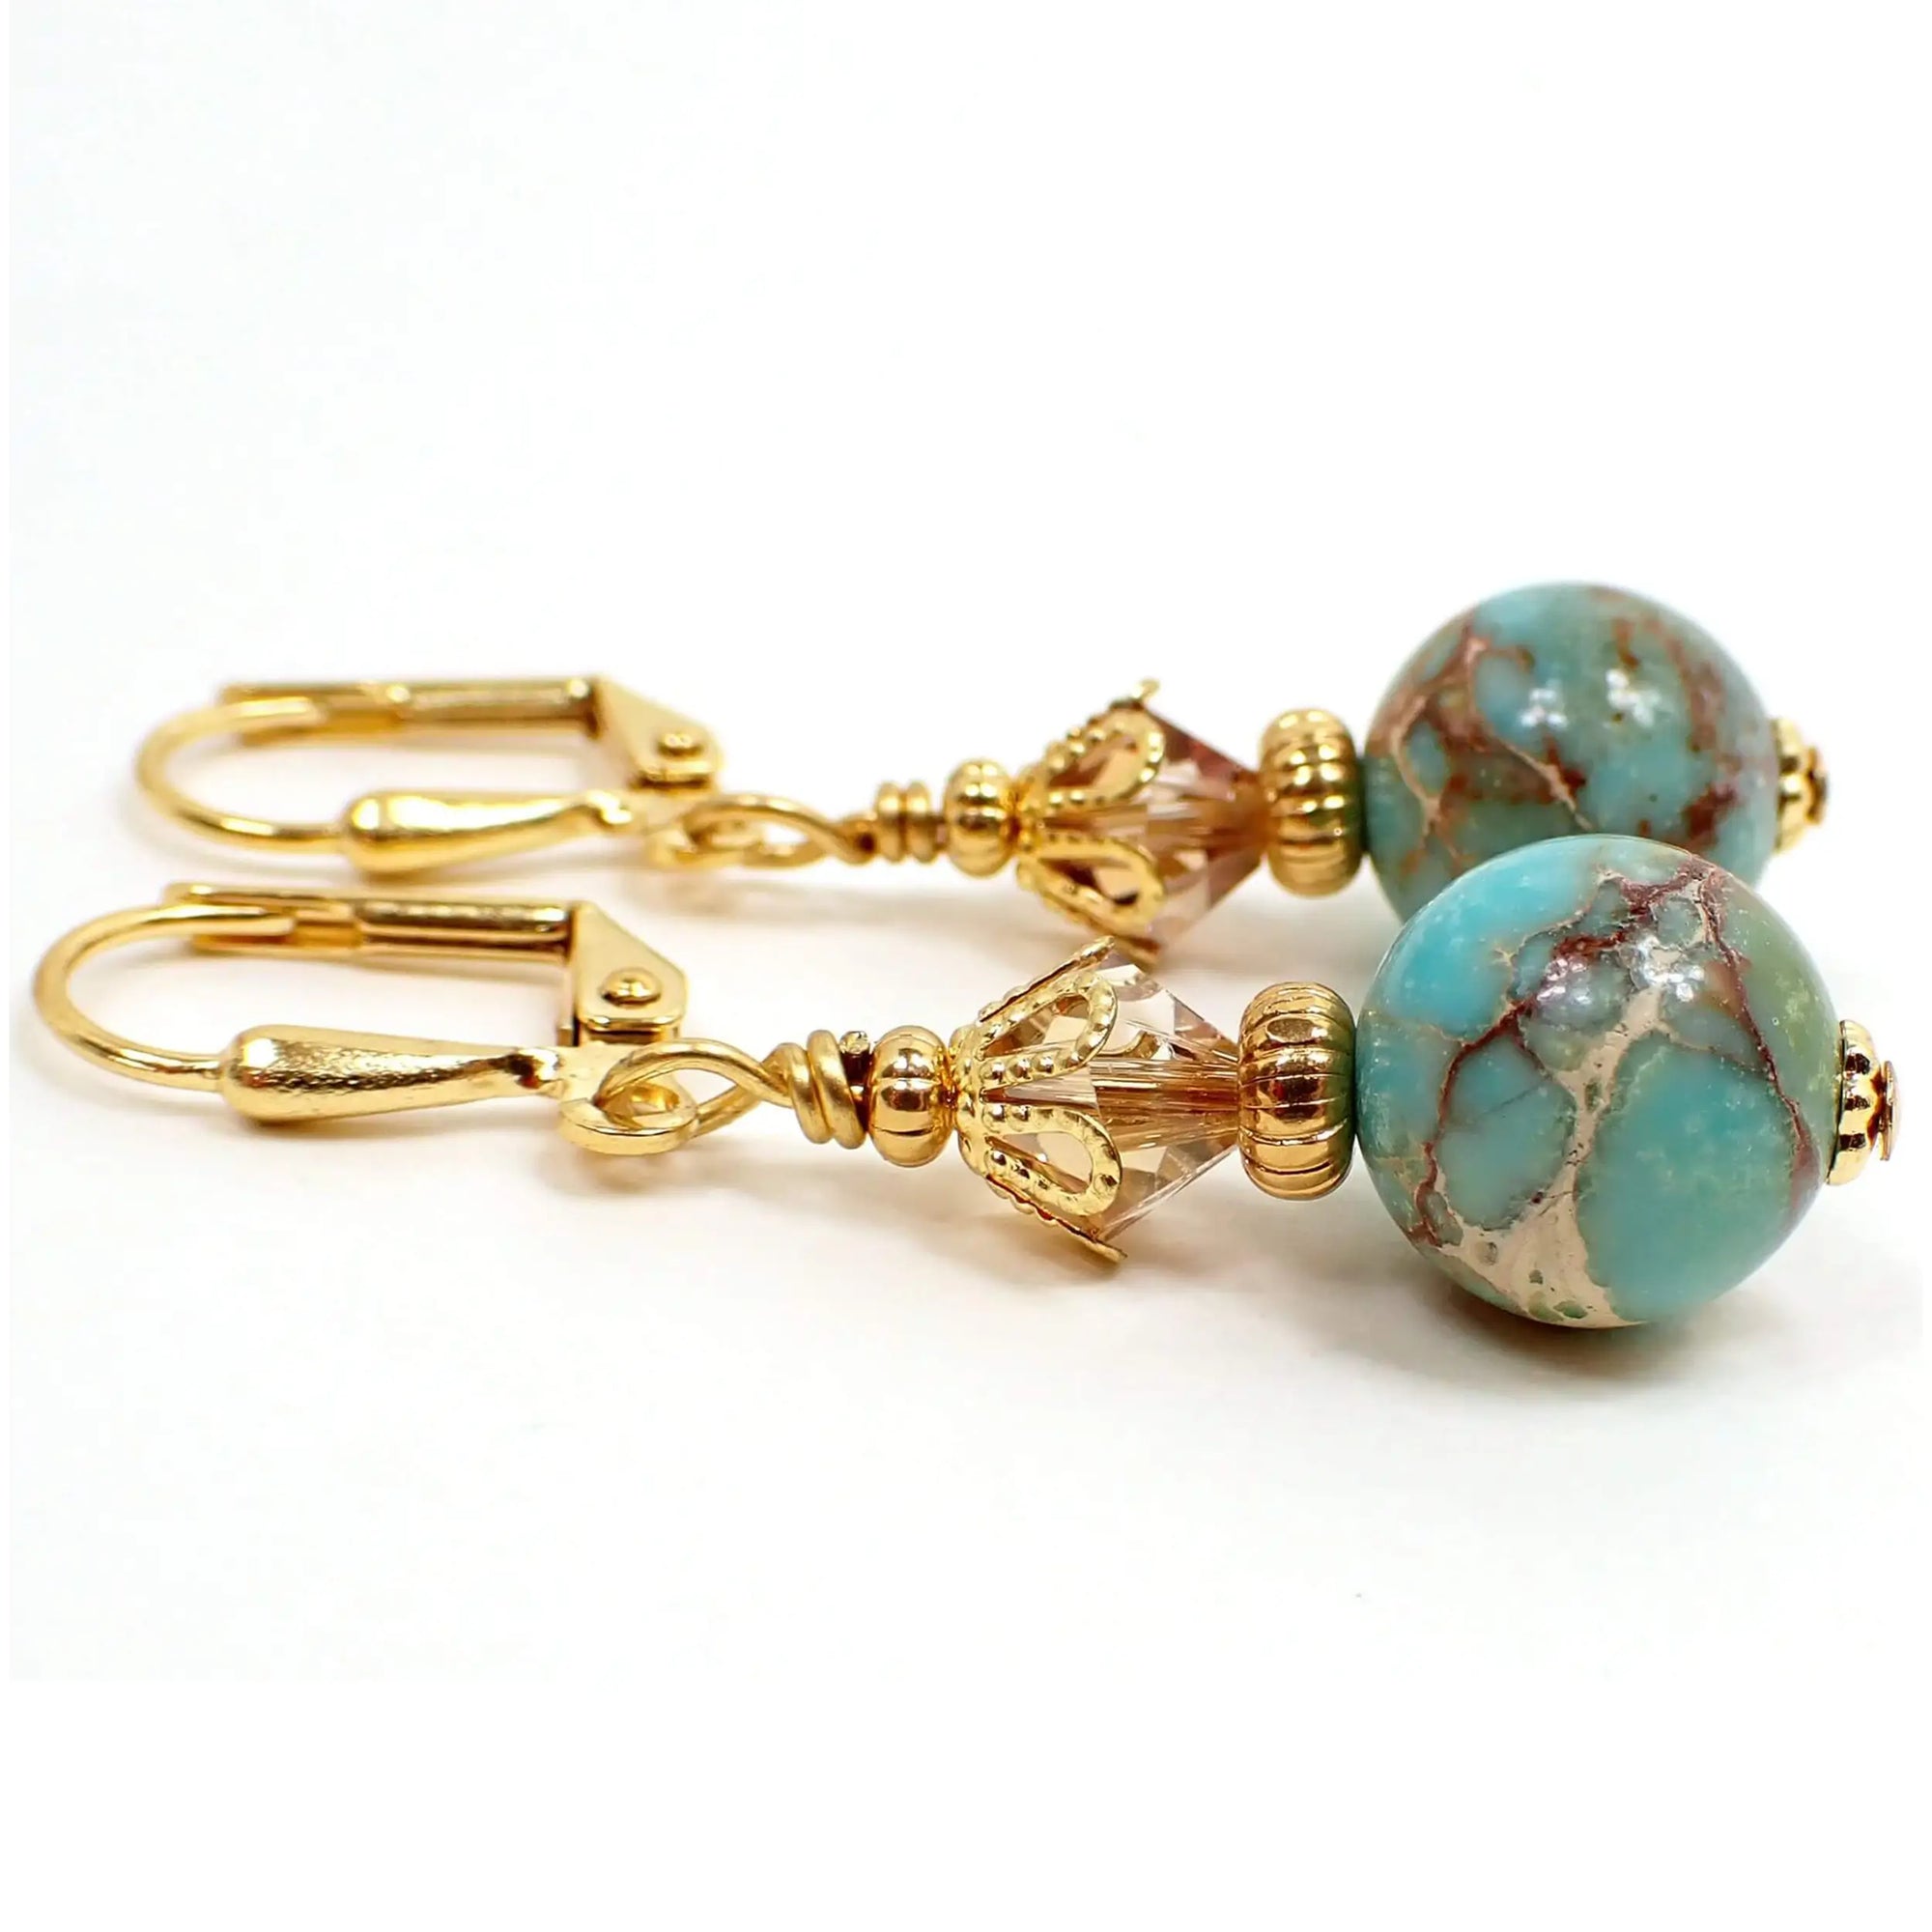 Side view of the handmade sea sediment jasper earrings. The metal on the earrings are gold plated. There are light champagne peach color faceted glass crystal beads at the top. The bottom beads are round and primarily aqua blue in color with marbled streaks of off white cream and shades of brown. There is a hint of red as well.